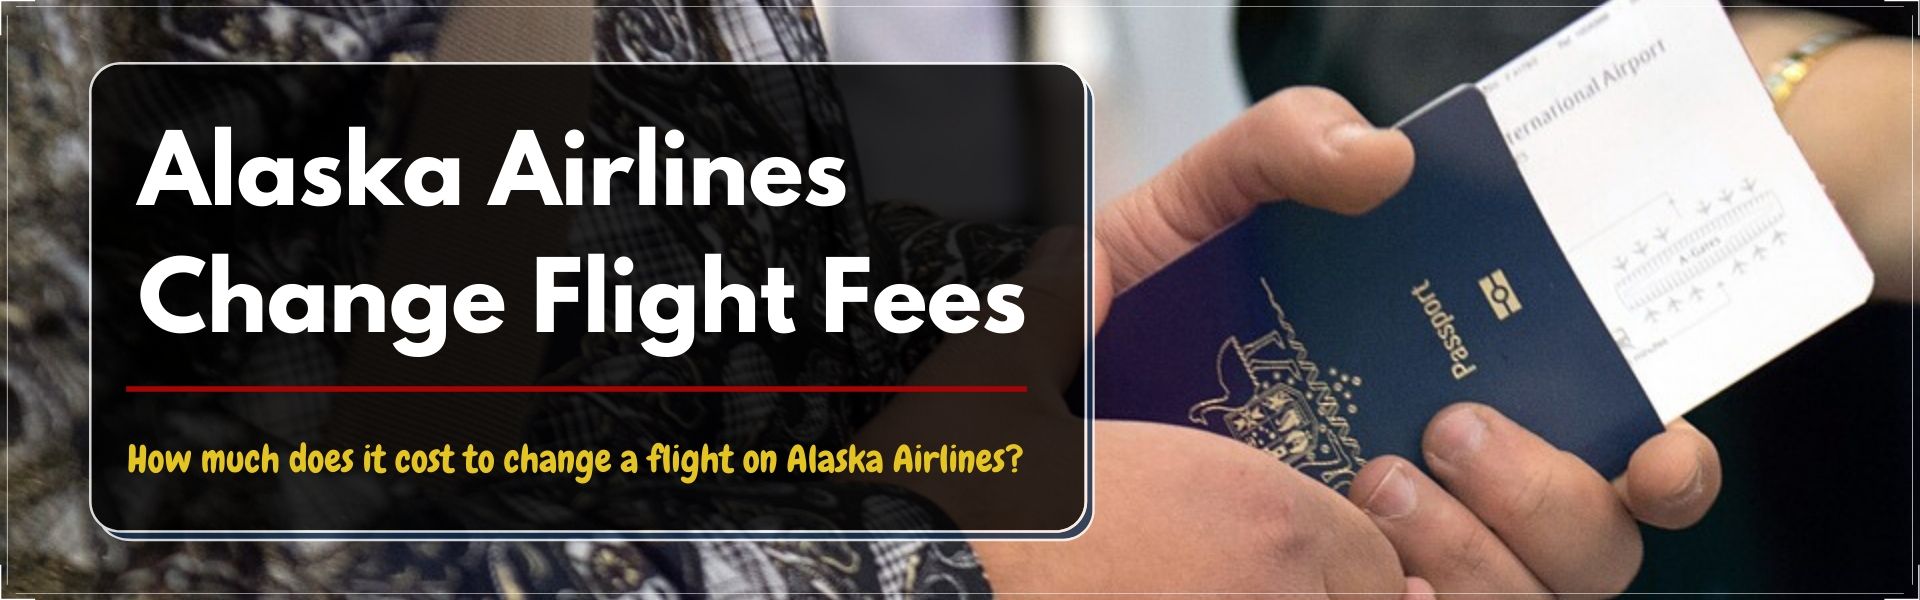 2020-06-13-06-01-42How much does it cost to change a flight on Alaska Airlines